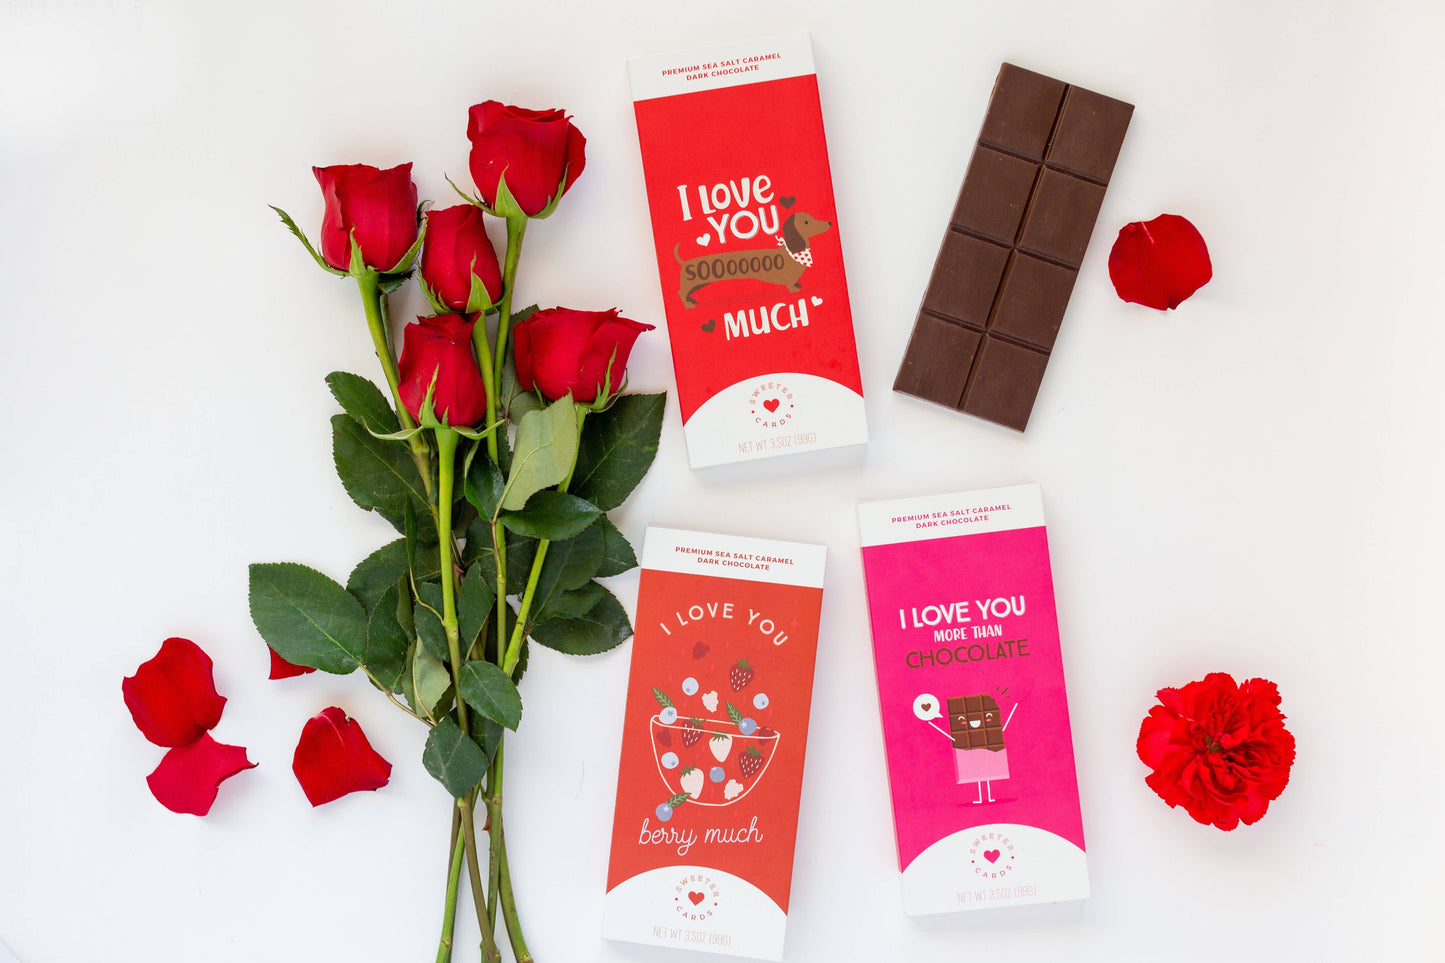 Sweeter Card: Valentine's Day Chocolate Bar + Card "I Love You SoOoO Much"  Sweeter Cards Chocolate Bar + Greeting Card in ONE!   -better made easy-eco-friendly-sustainable-gifting